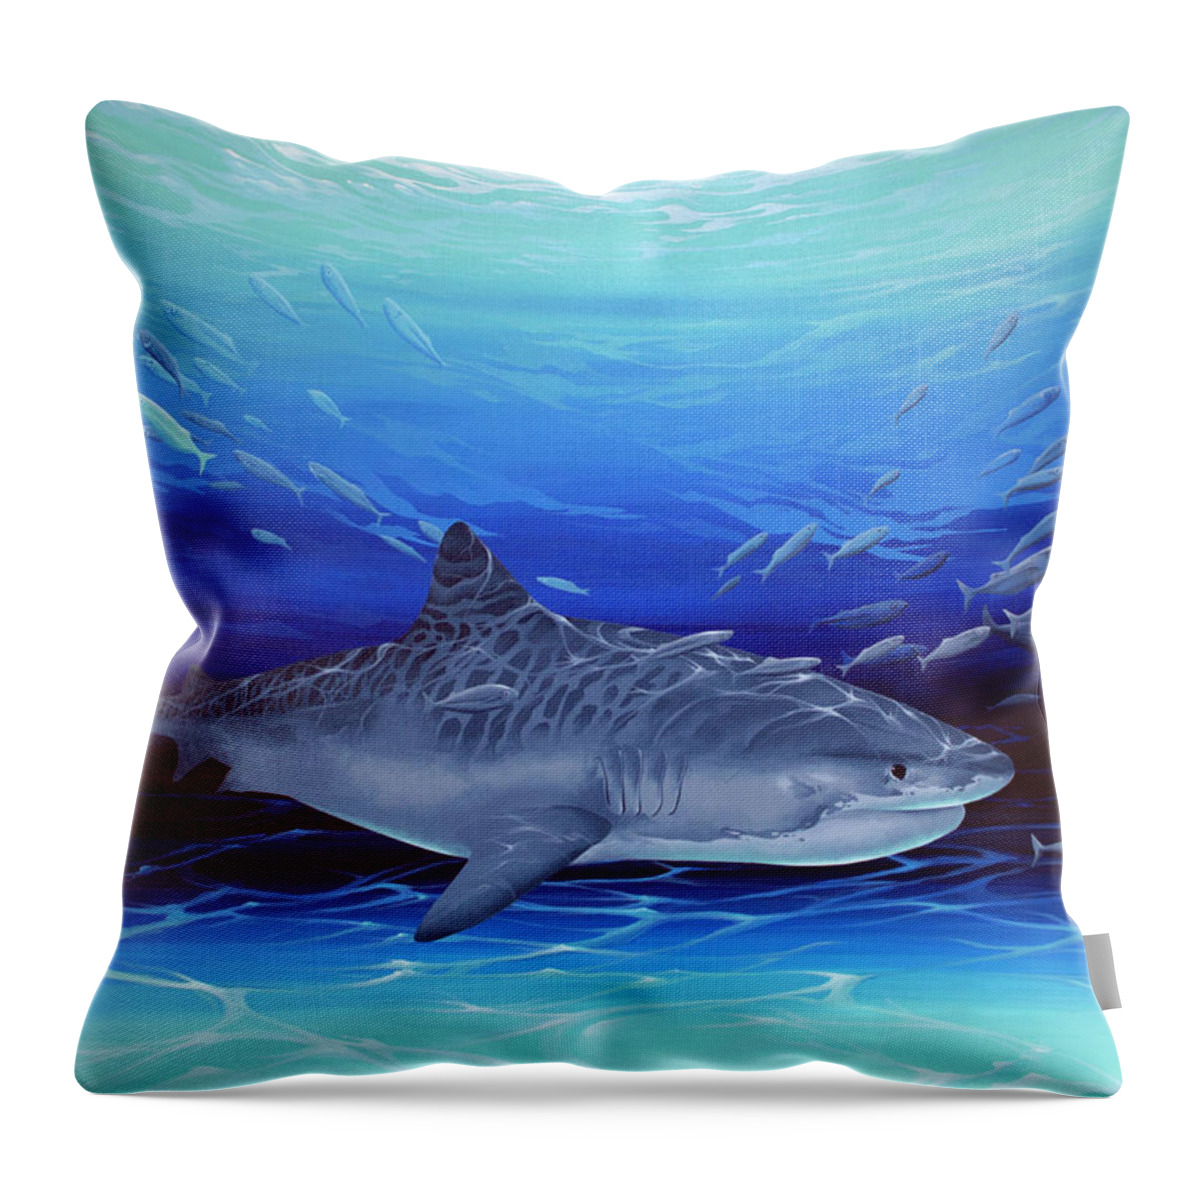 Sealife Throw Pillow featuring the painting Tiger by William Love